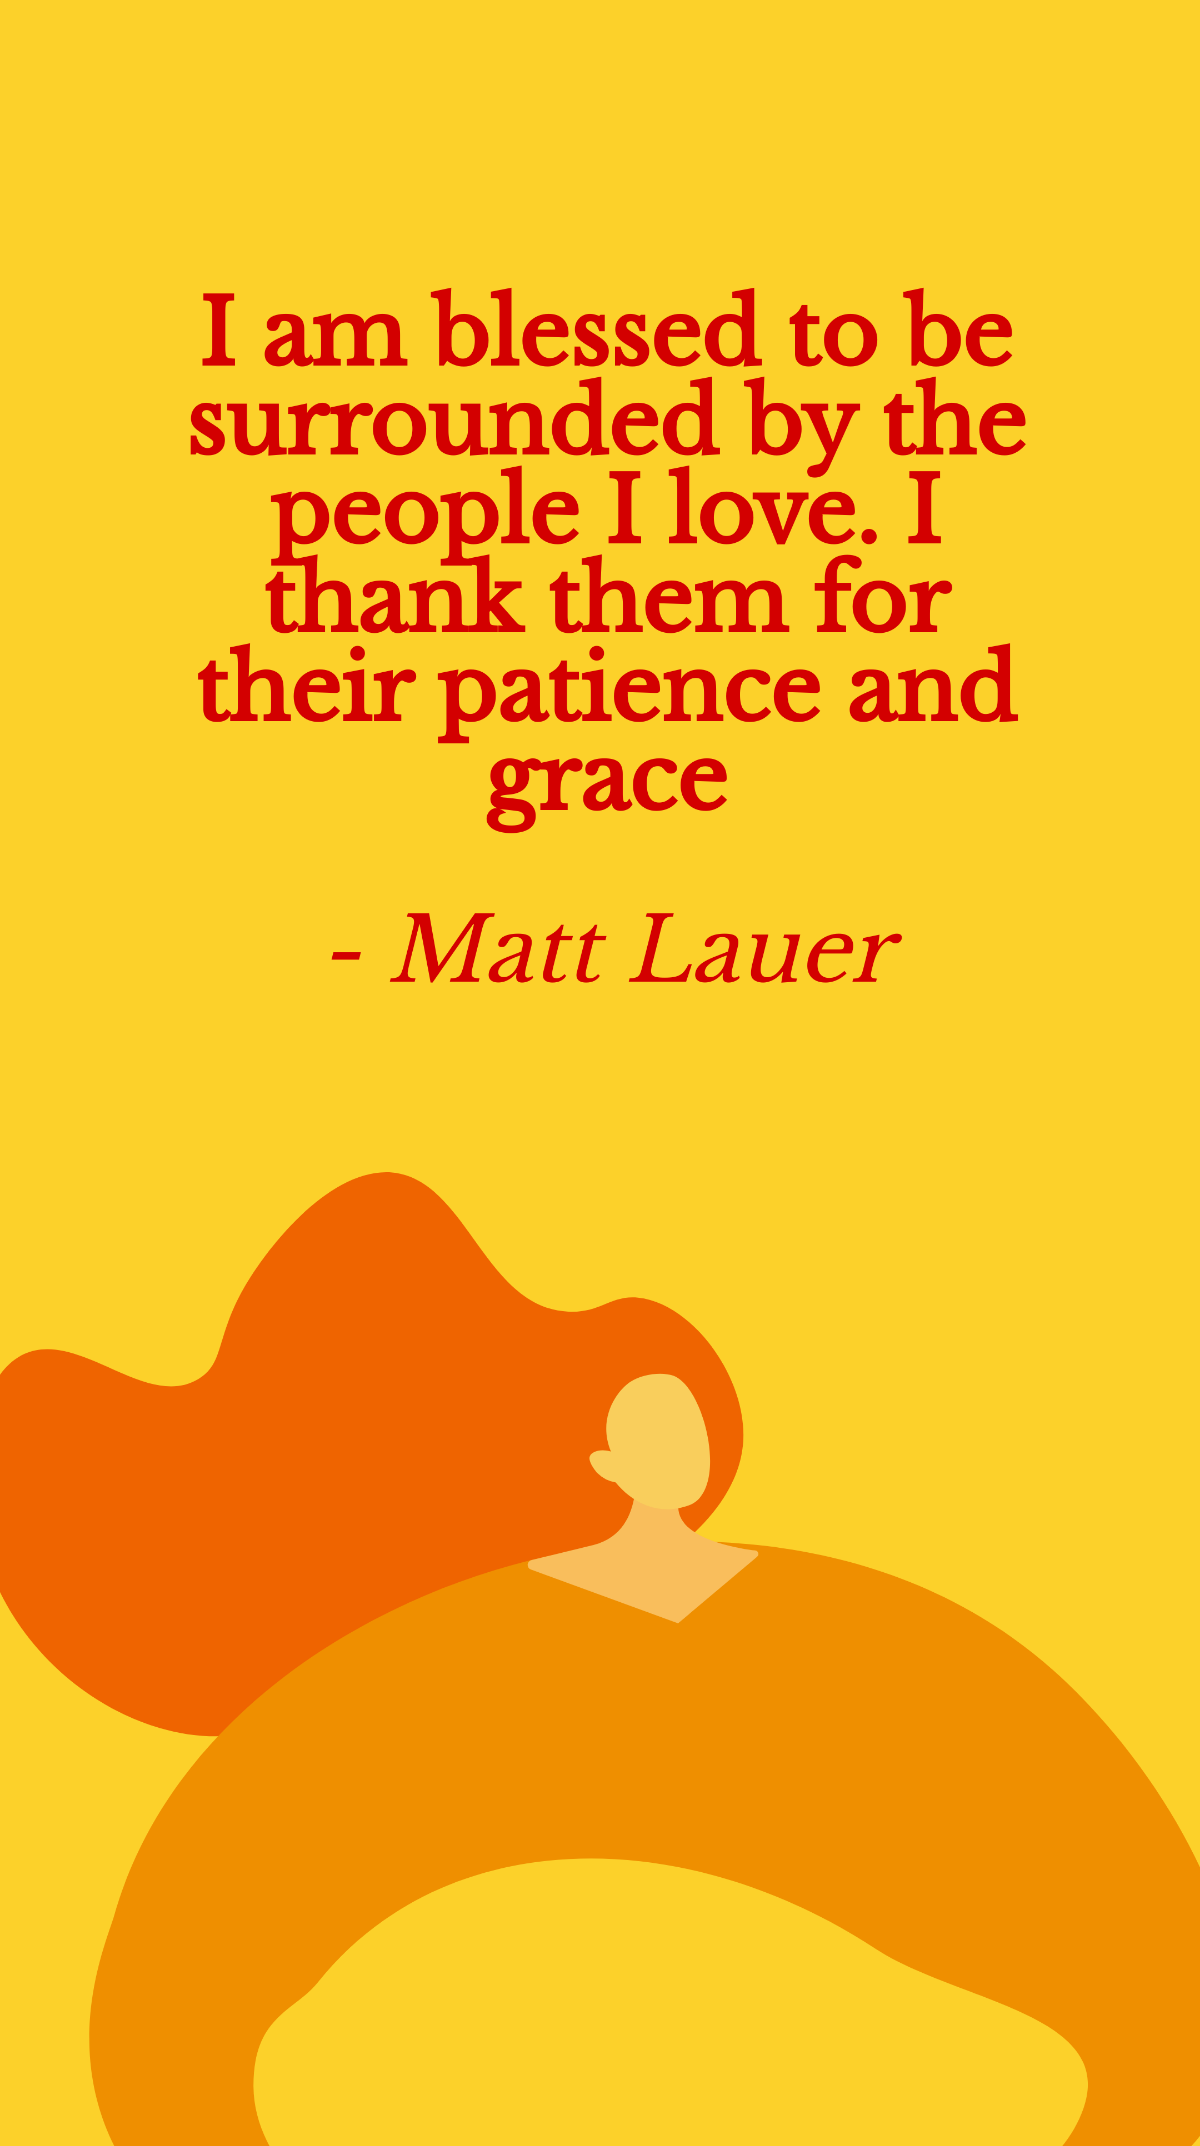 Matt Lauer - I am blessed to be surrounded by the people I love. I thank them for their patience and grace